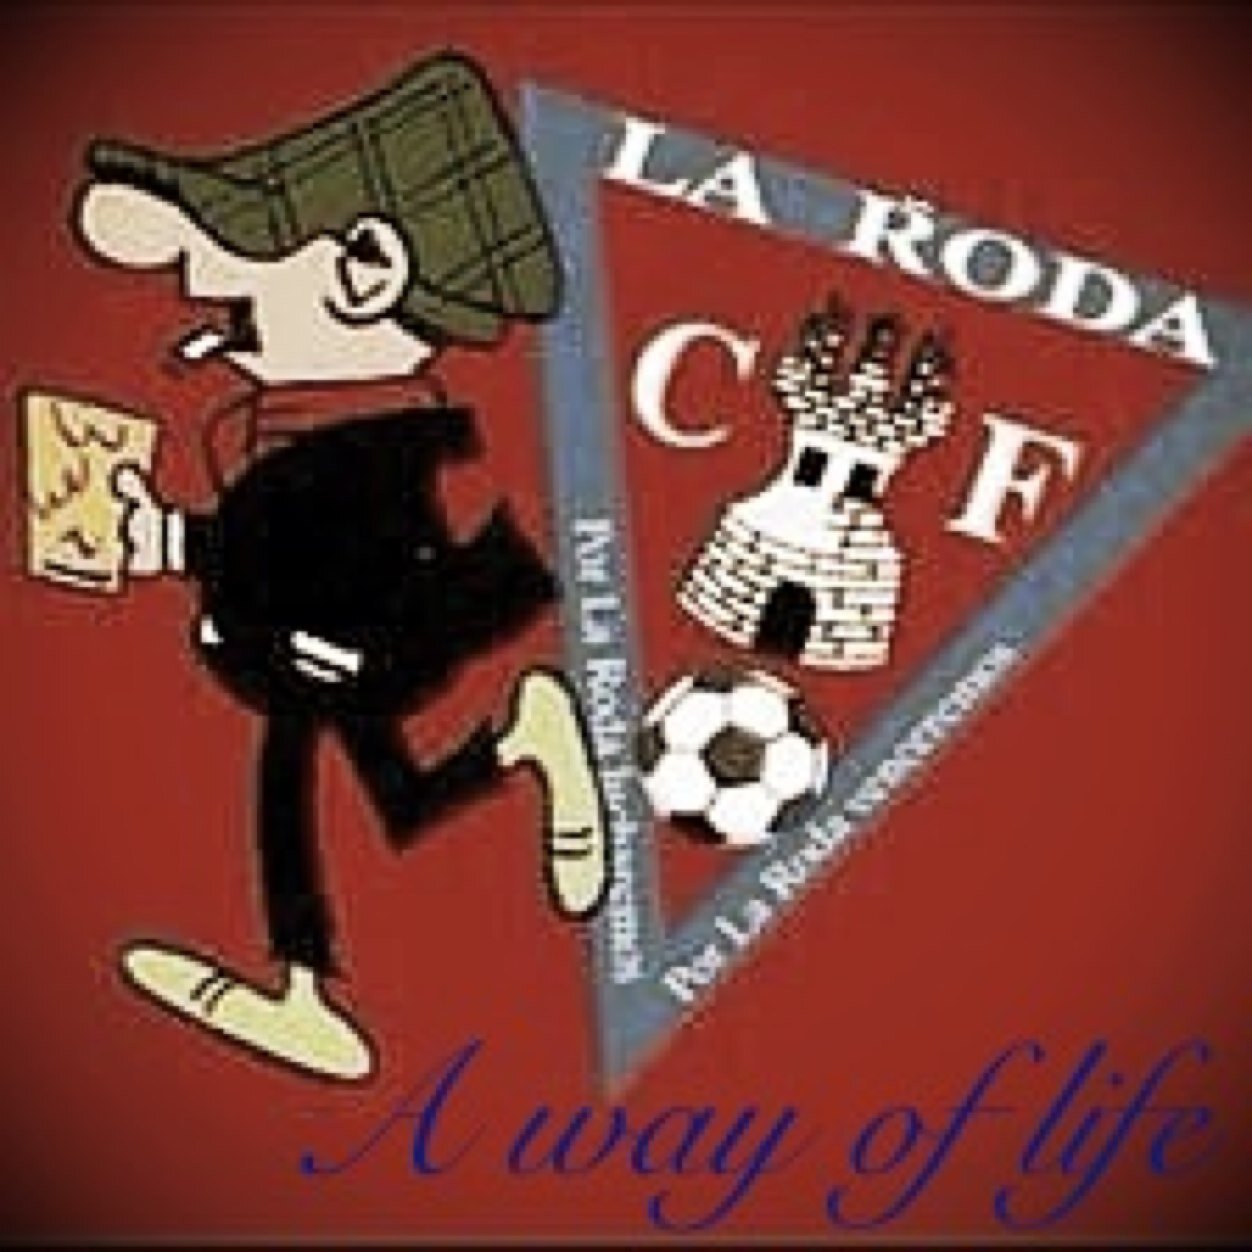 Twitter Official Hinchas LRCF y FGLR || A way of life || A.C.A.B. || Support your local team || Since 1960 || Against racism ||